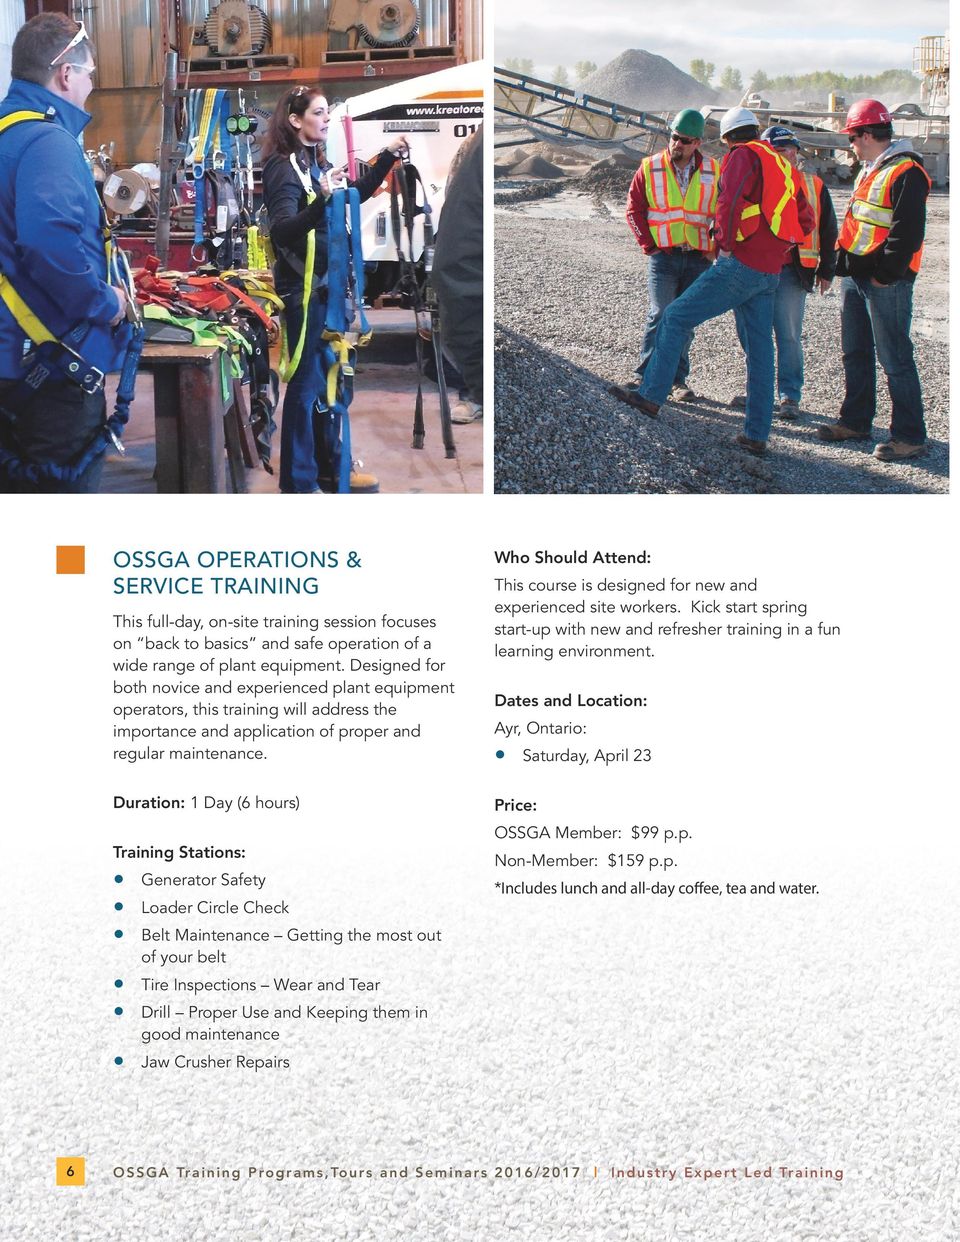 Duration: 1 Day (6 hours) Training Stations: Generator Safety Loader Circle Check Belt Maintenance Getting the most out This course is designed for new and experienced site workers.